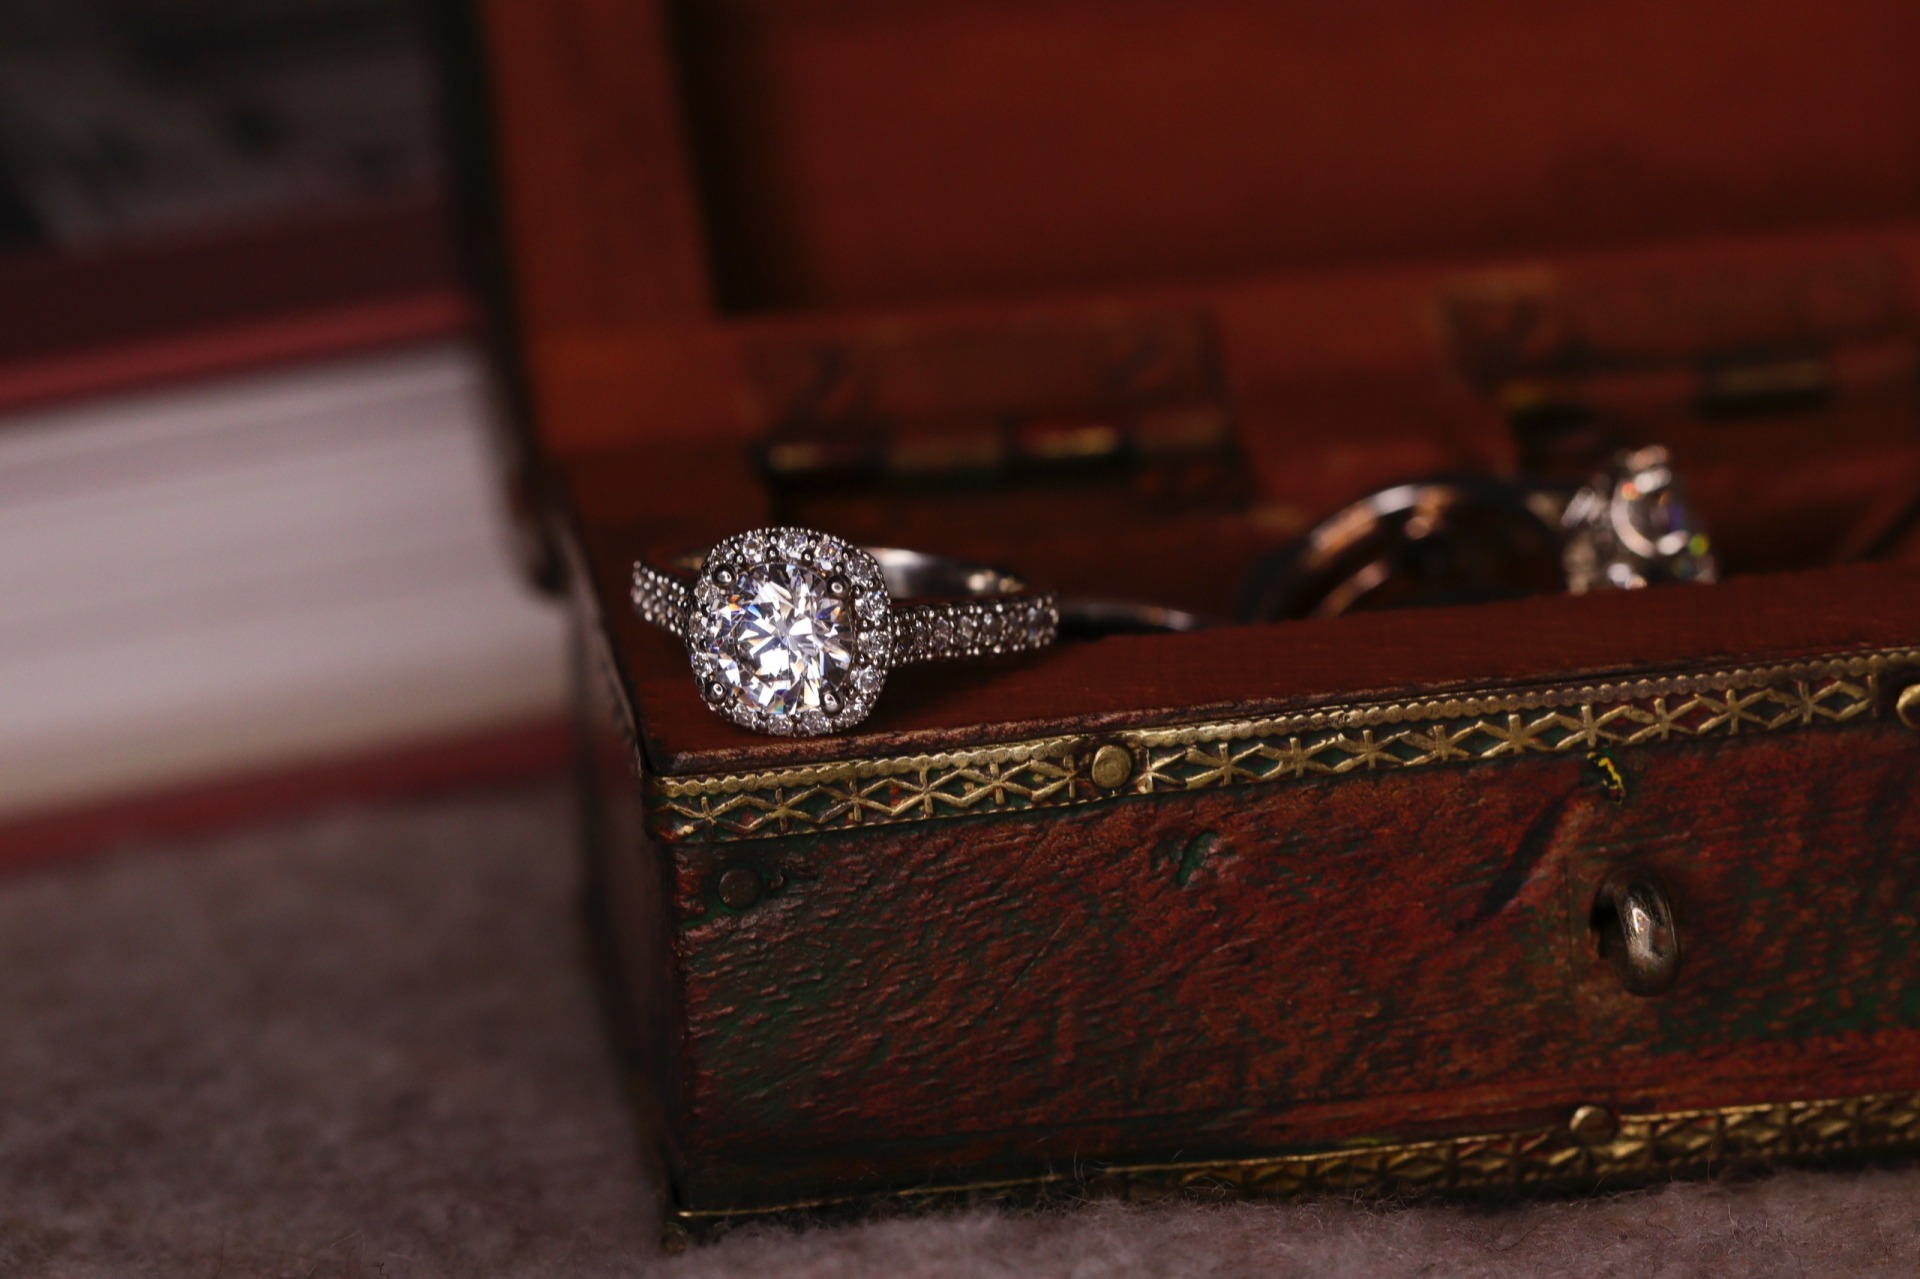 ring displayed on edge of small jewelry box